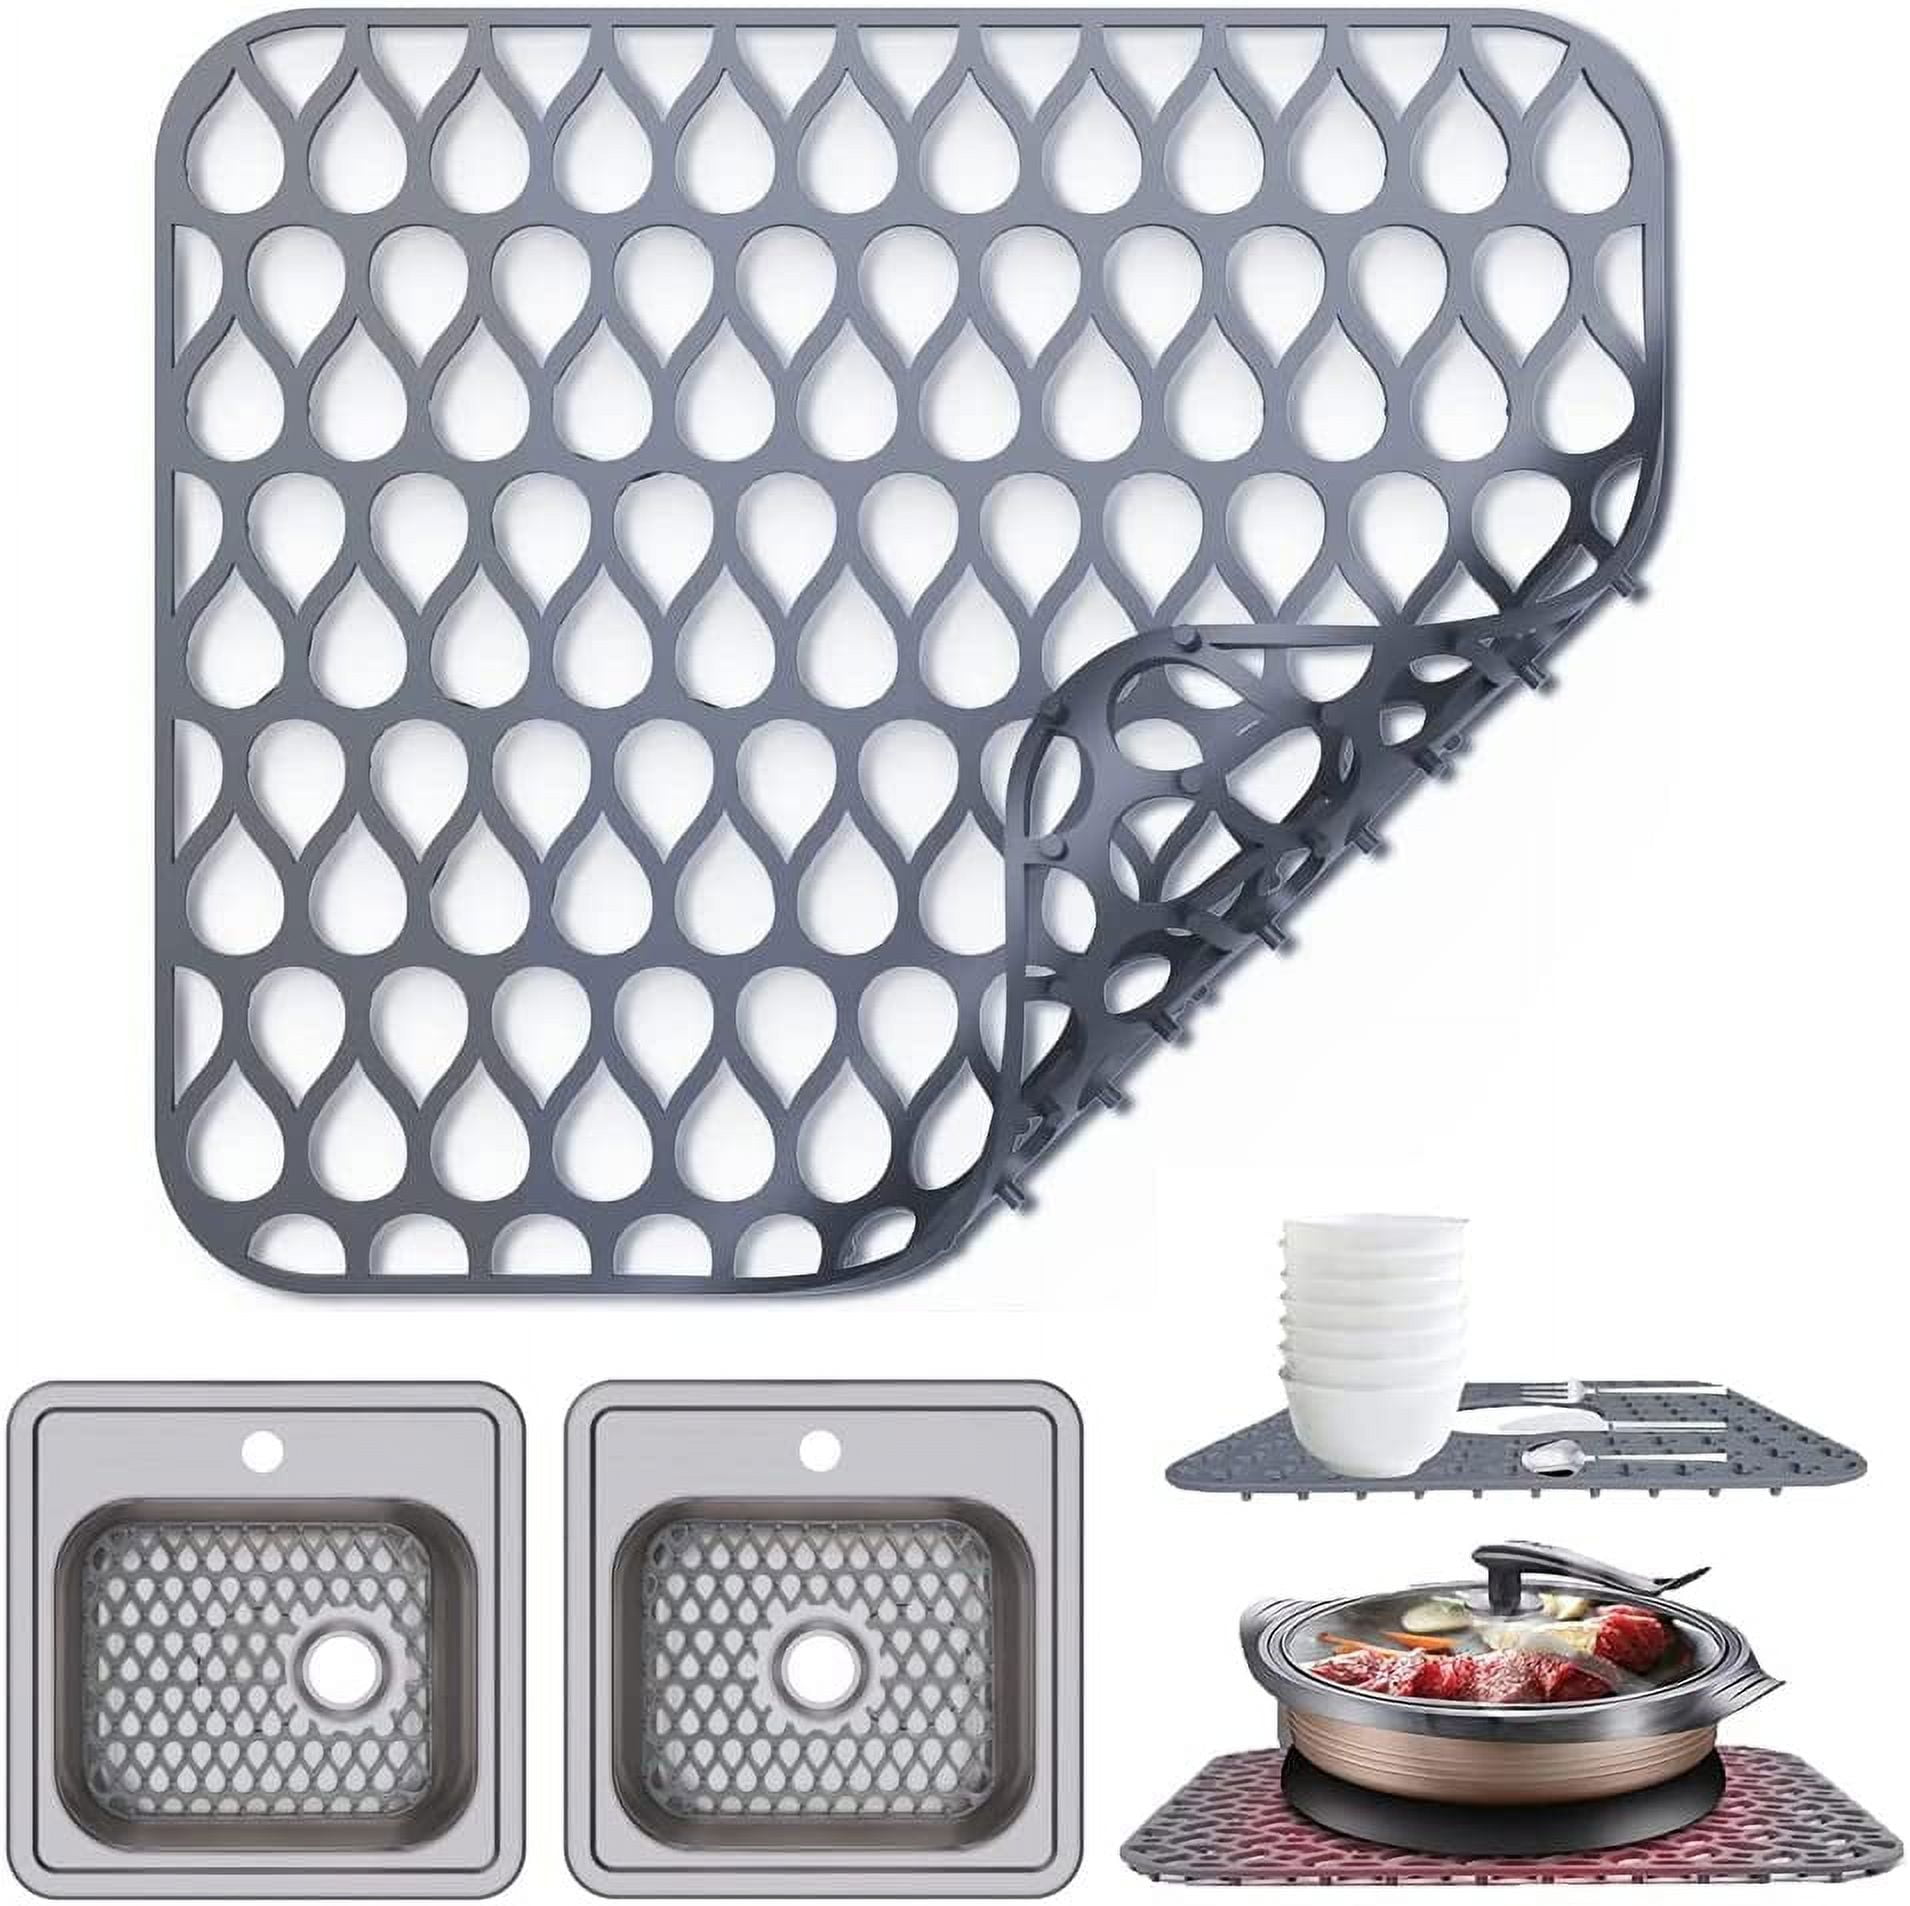 OAVQHLG3B Silicone Sink Protector, Rear Drain Kitchen Sink Mats Grid  Accessory,Folding Non-slip Sink Mat for Bottom of Farmhouse Stainless Steel  Porcelain Sink 